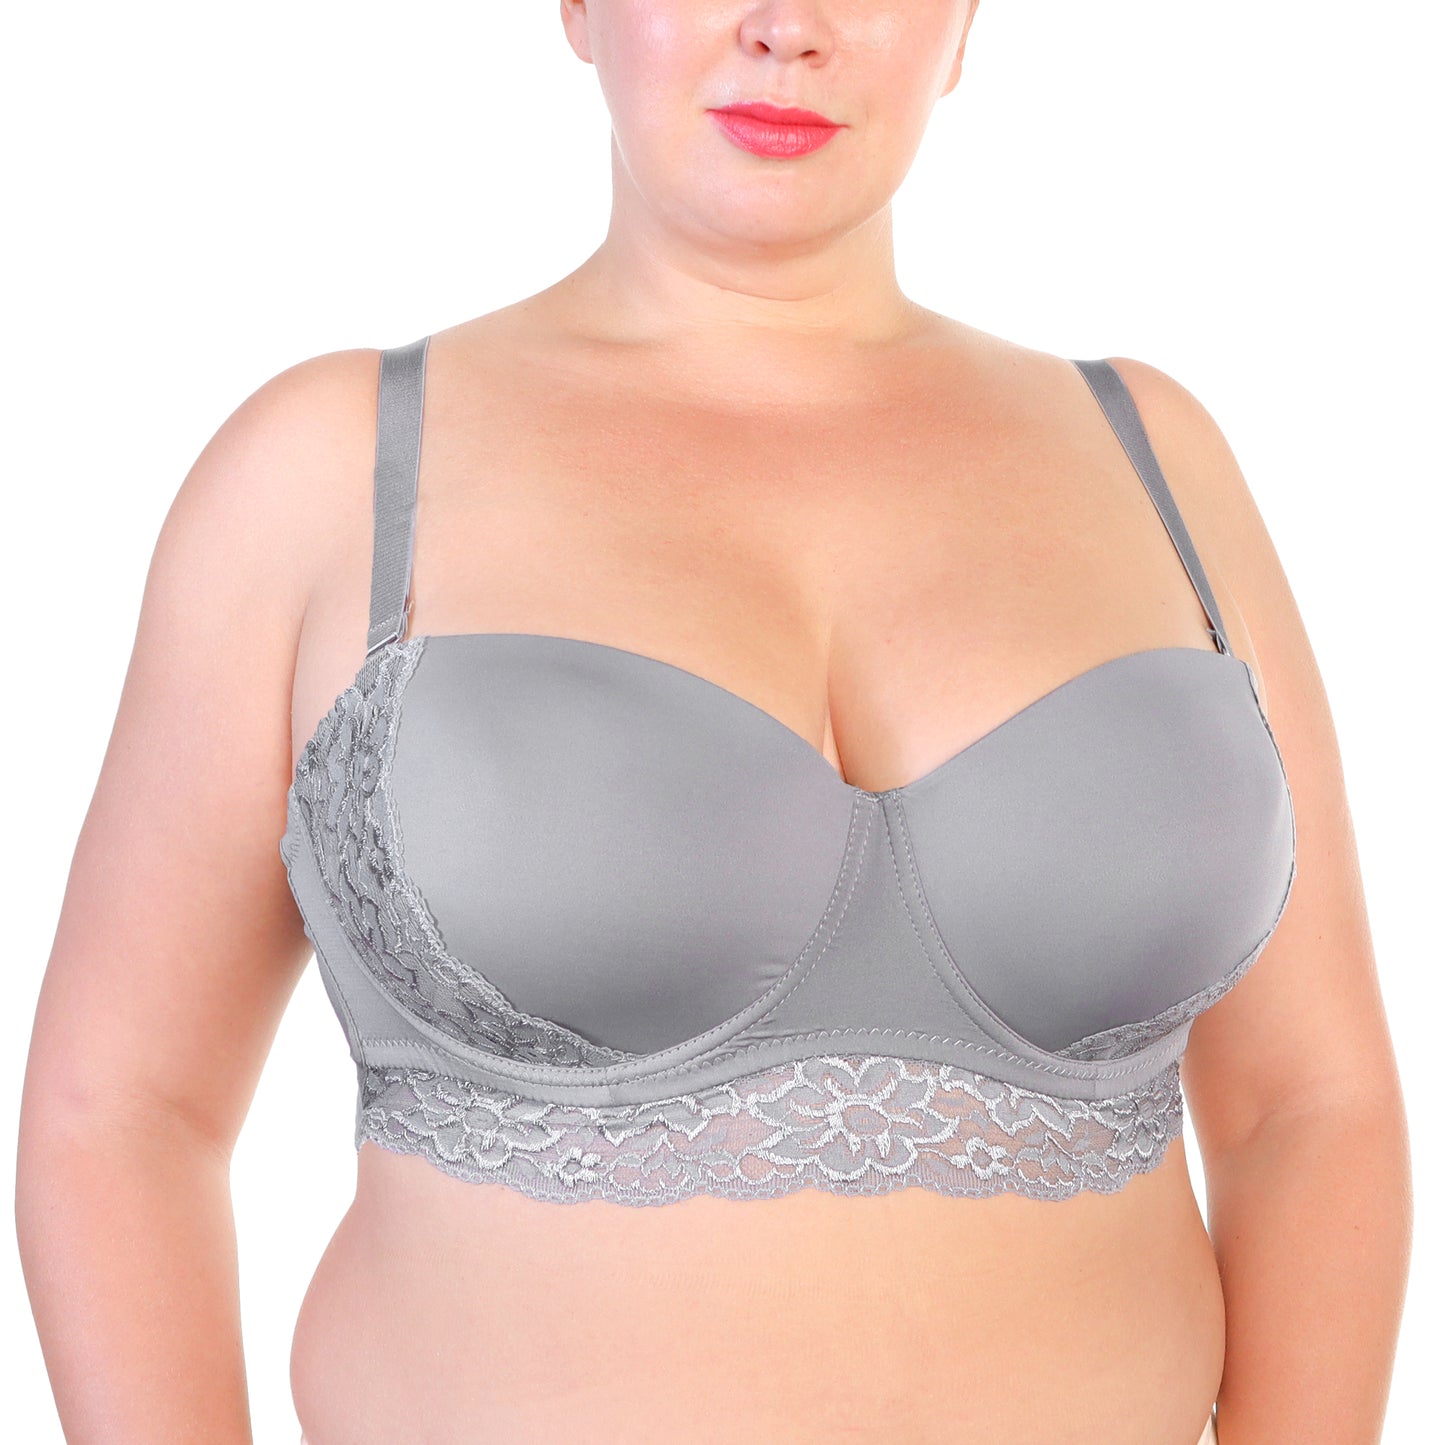 Angelina Wired, Padded Extended Size Strapless Bras with Lace Accent (6-Pack), #B208